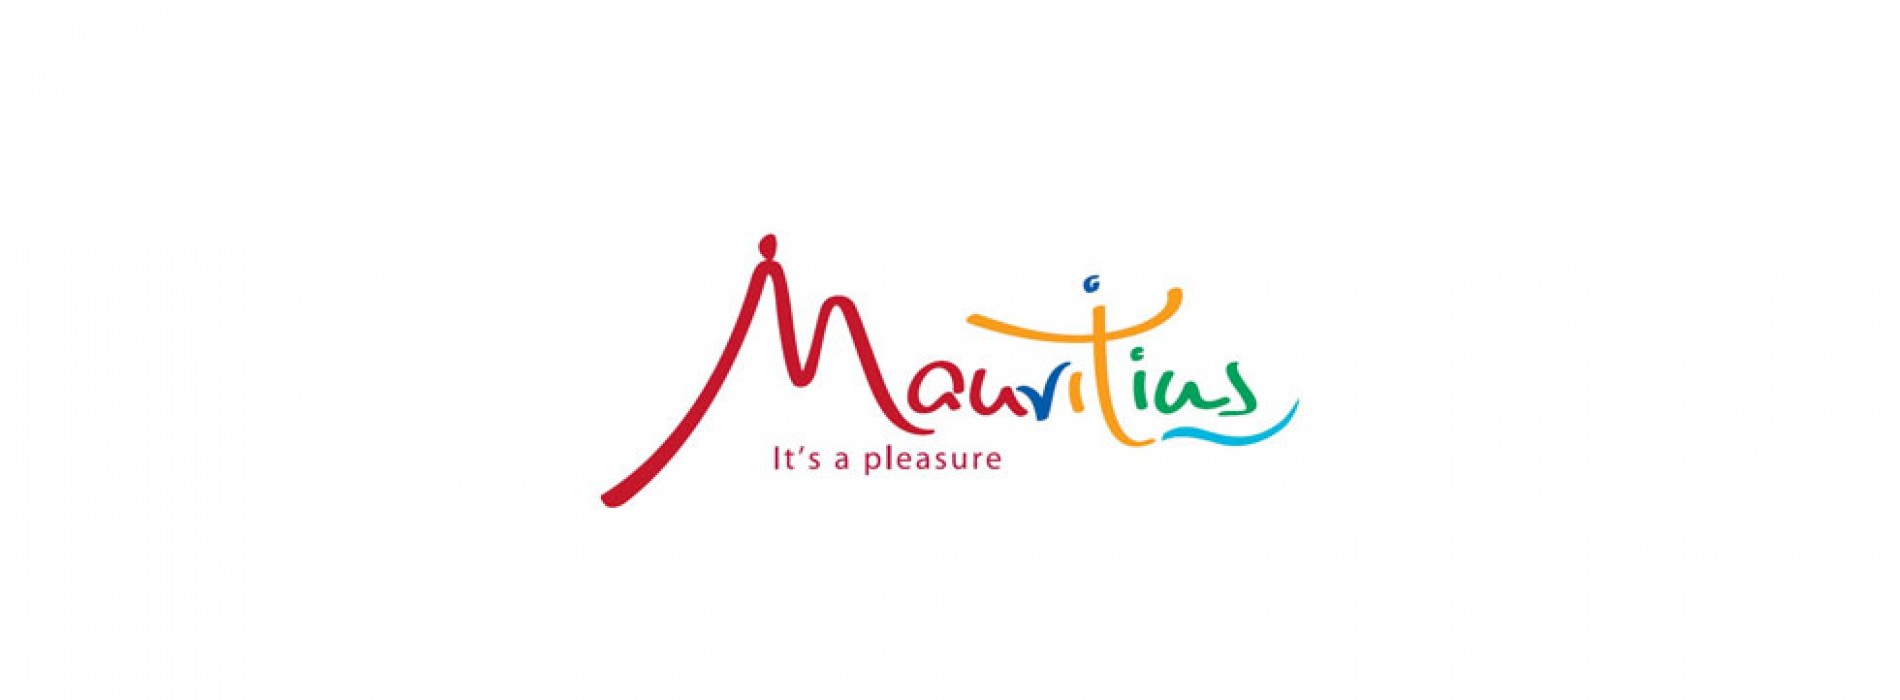 Mauritius records 18 % growth in Indian tourist arrivals in 2015